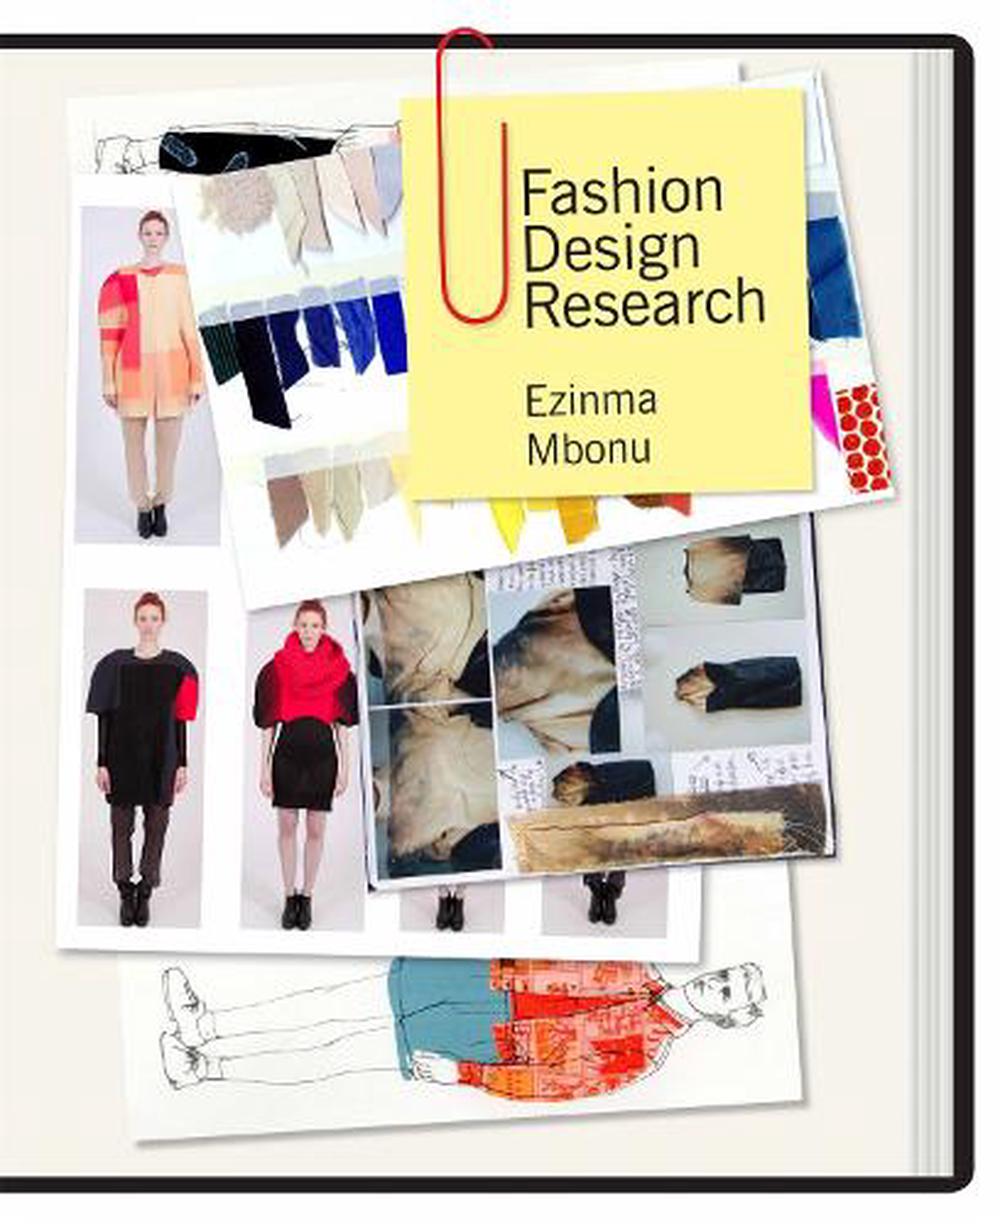 fashion research articles